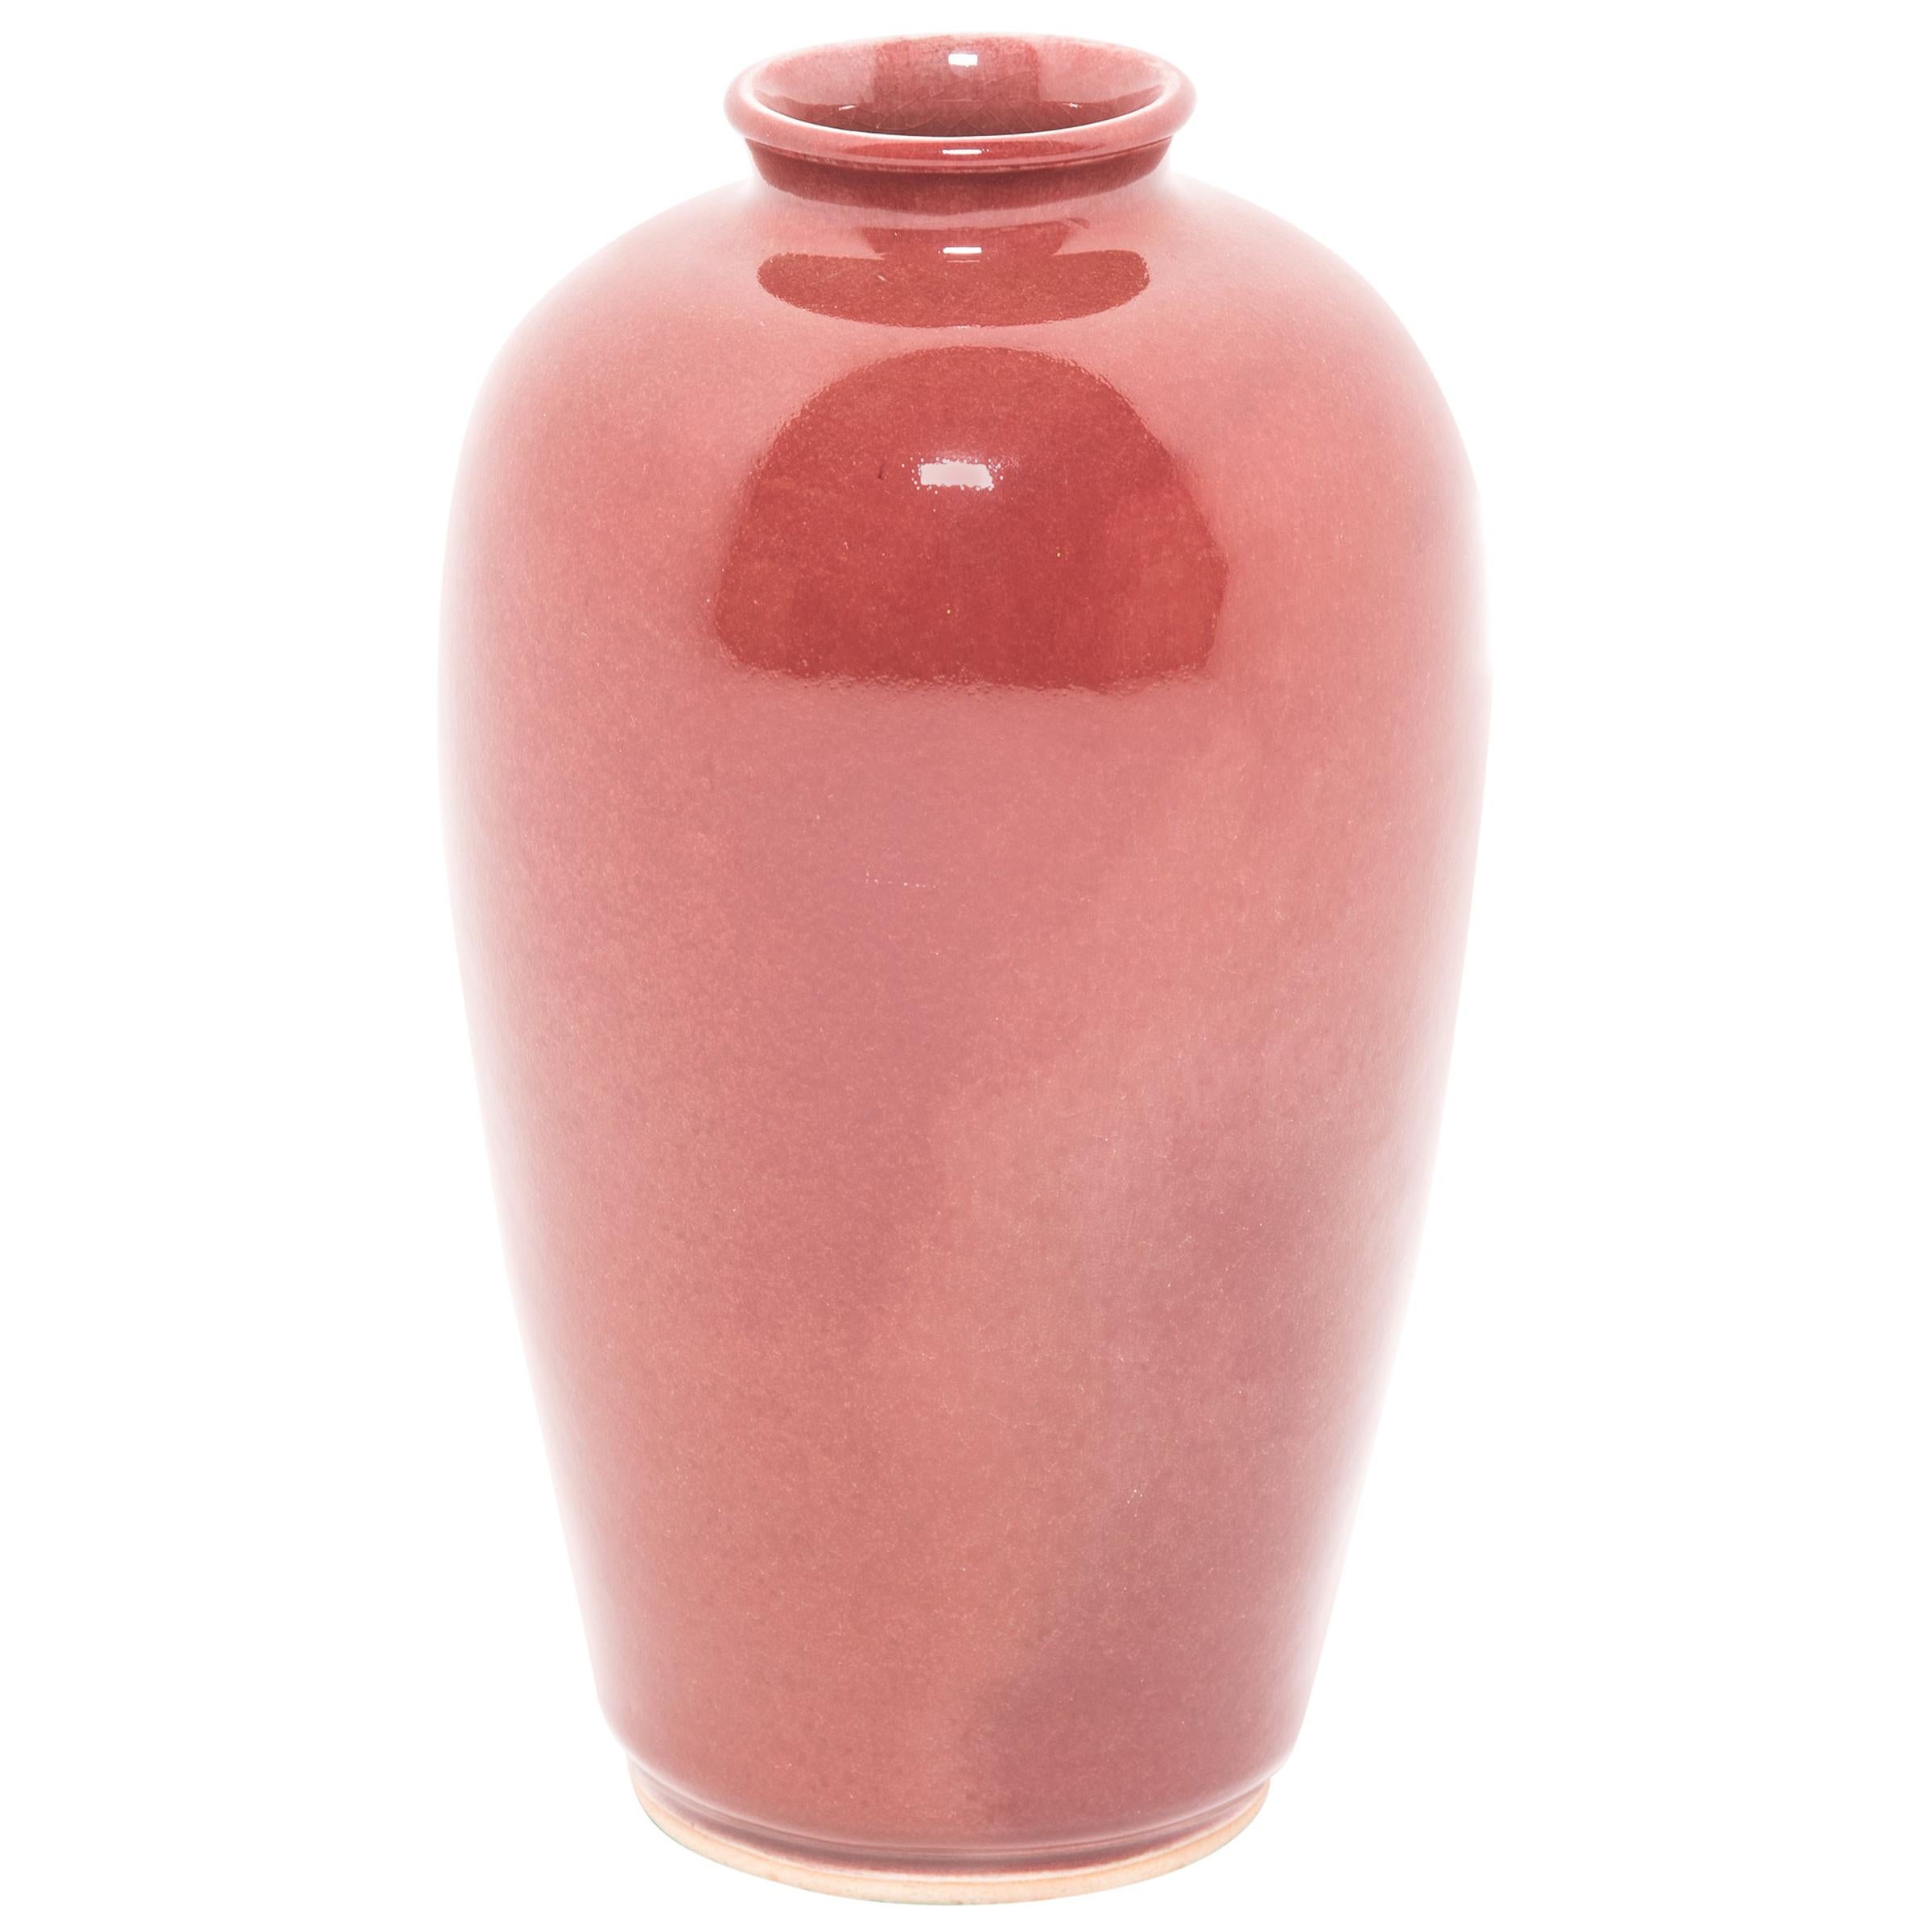 Chinese Oxblood Meiping Vase, c. 1850